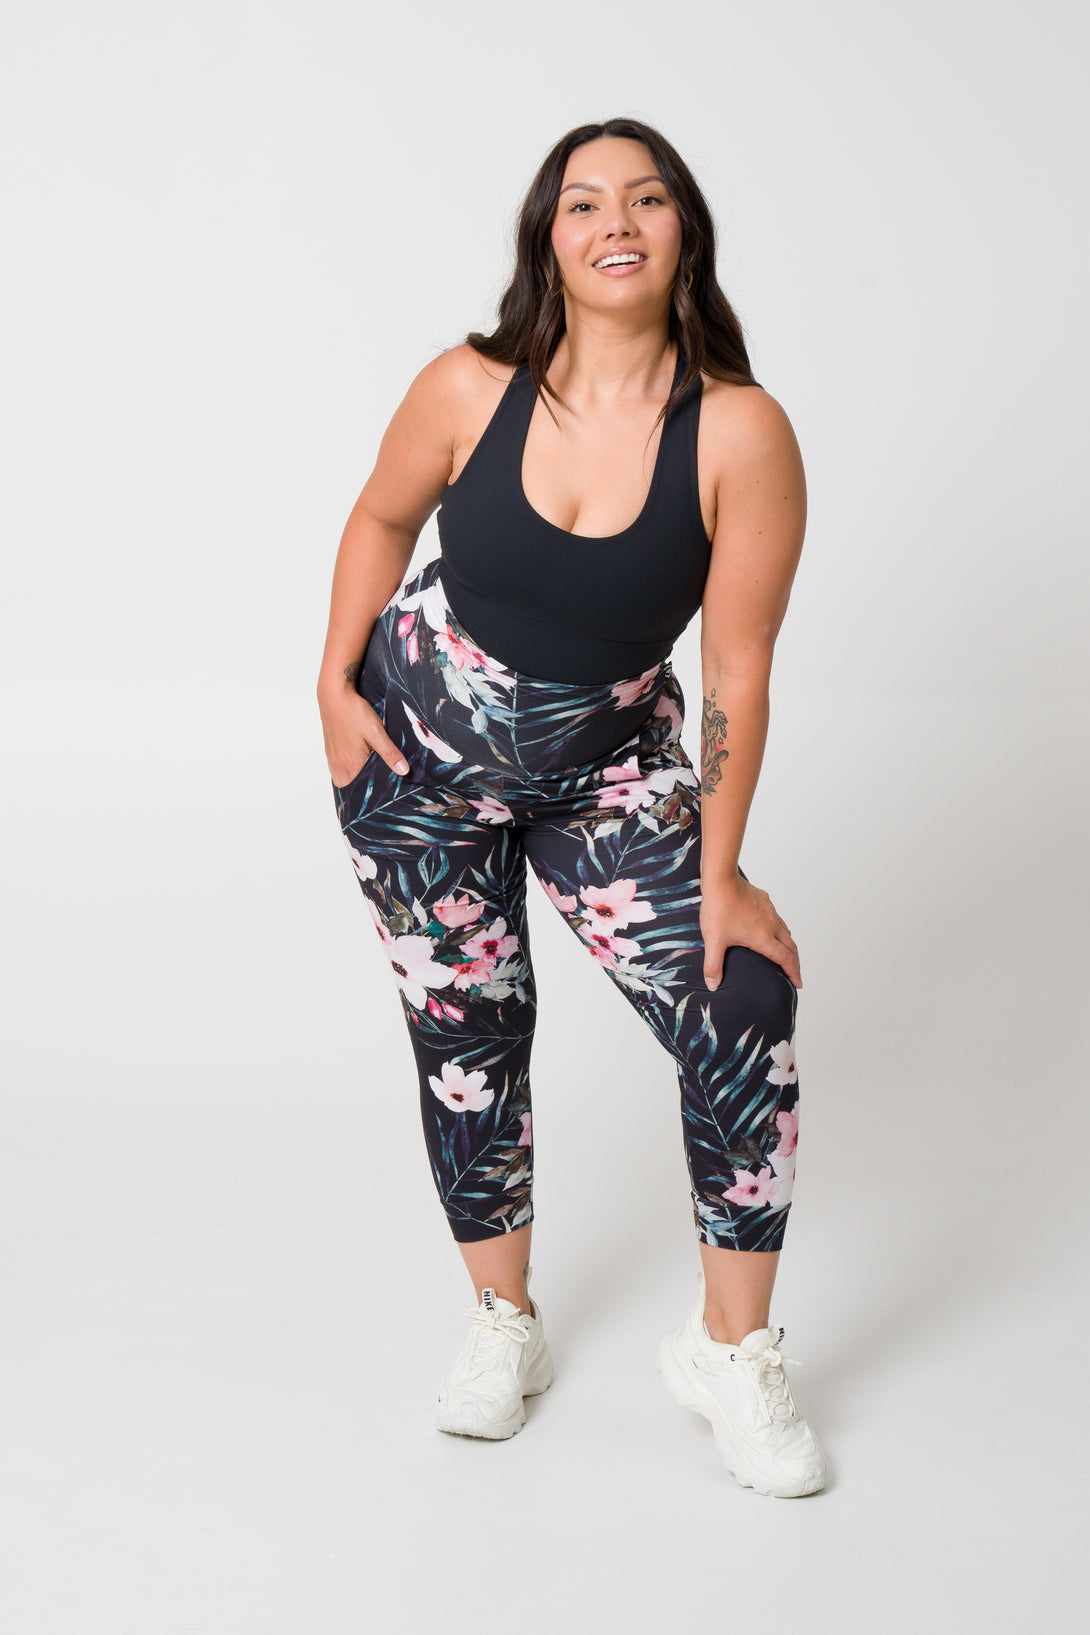 Exotic At Heart Soft to Touch - Jogger Capris w/ Pockets - Exoticathletica